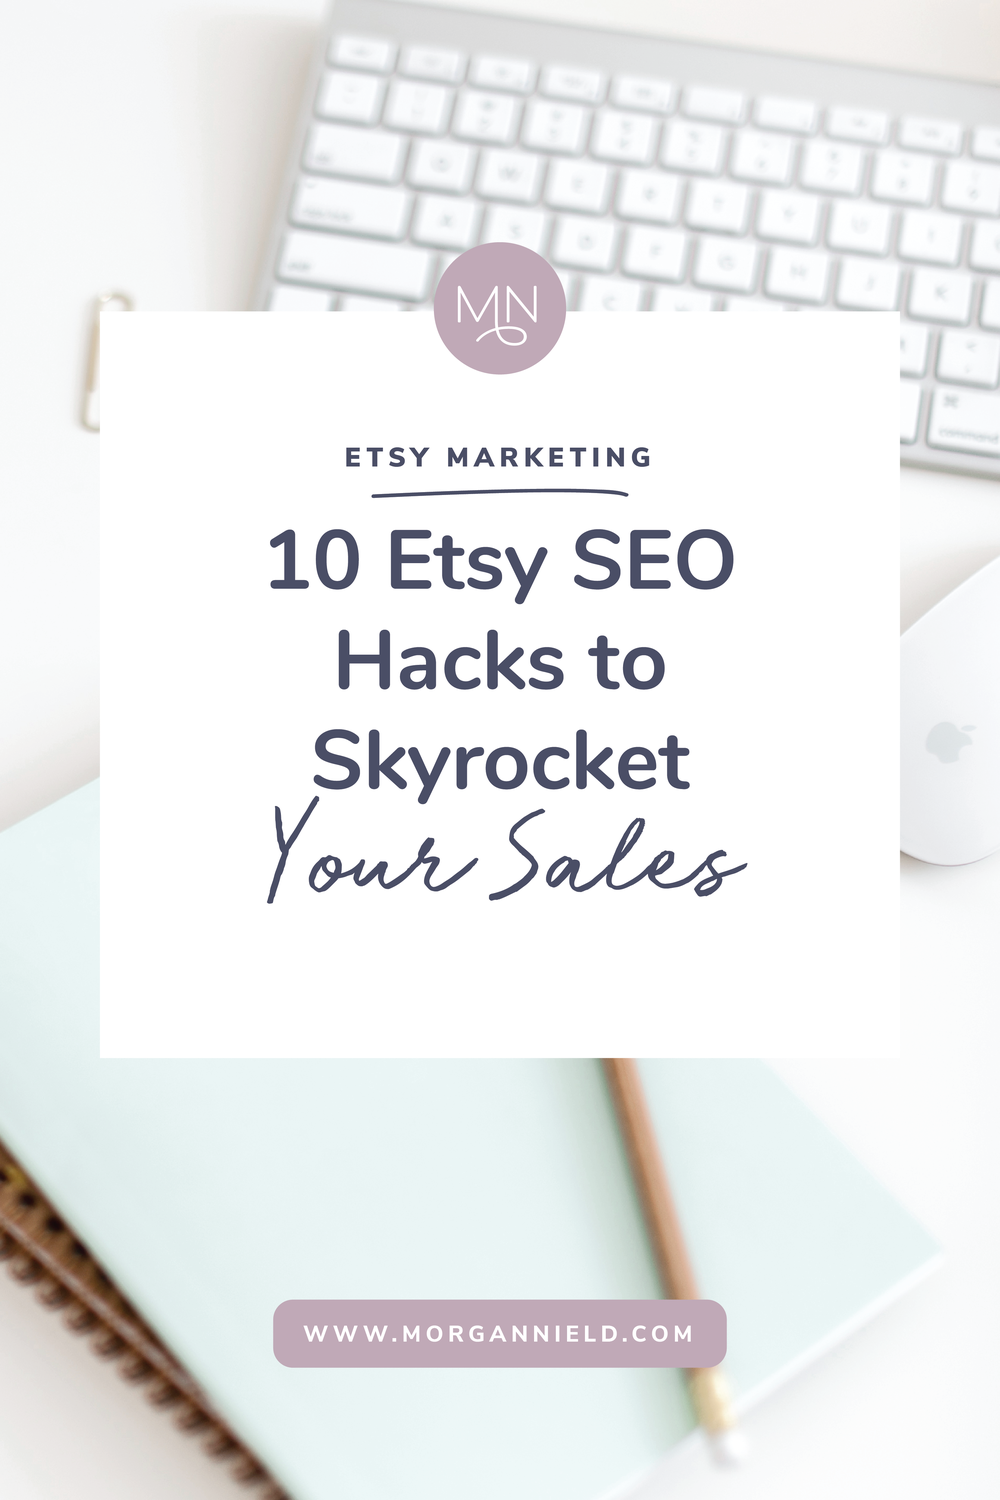 More than 300 tips to market your Etsy store